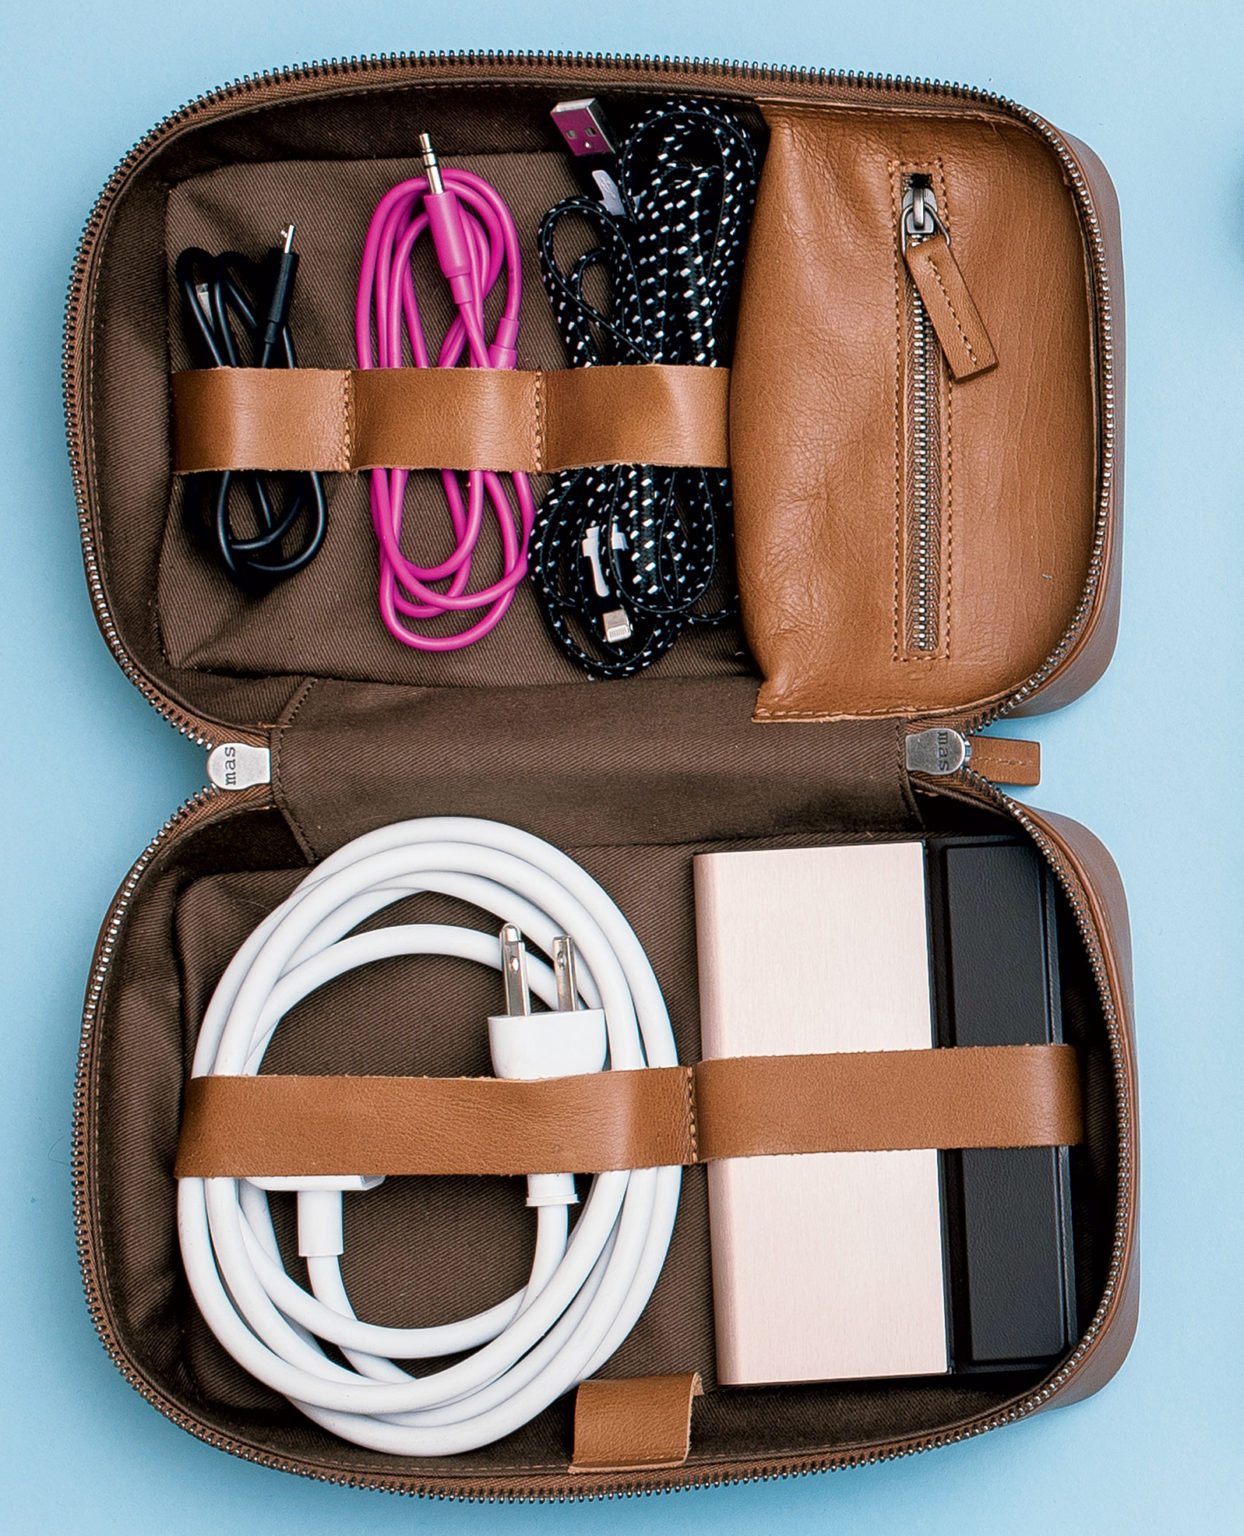 travelsmarts luggage & travel accessories